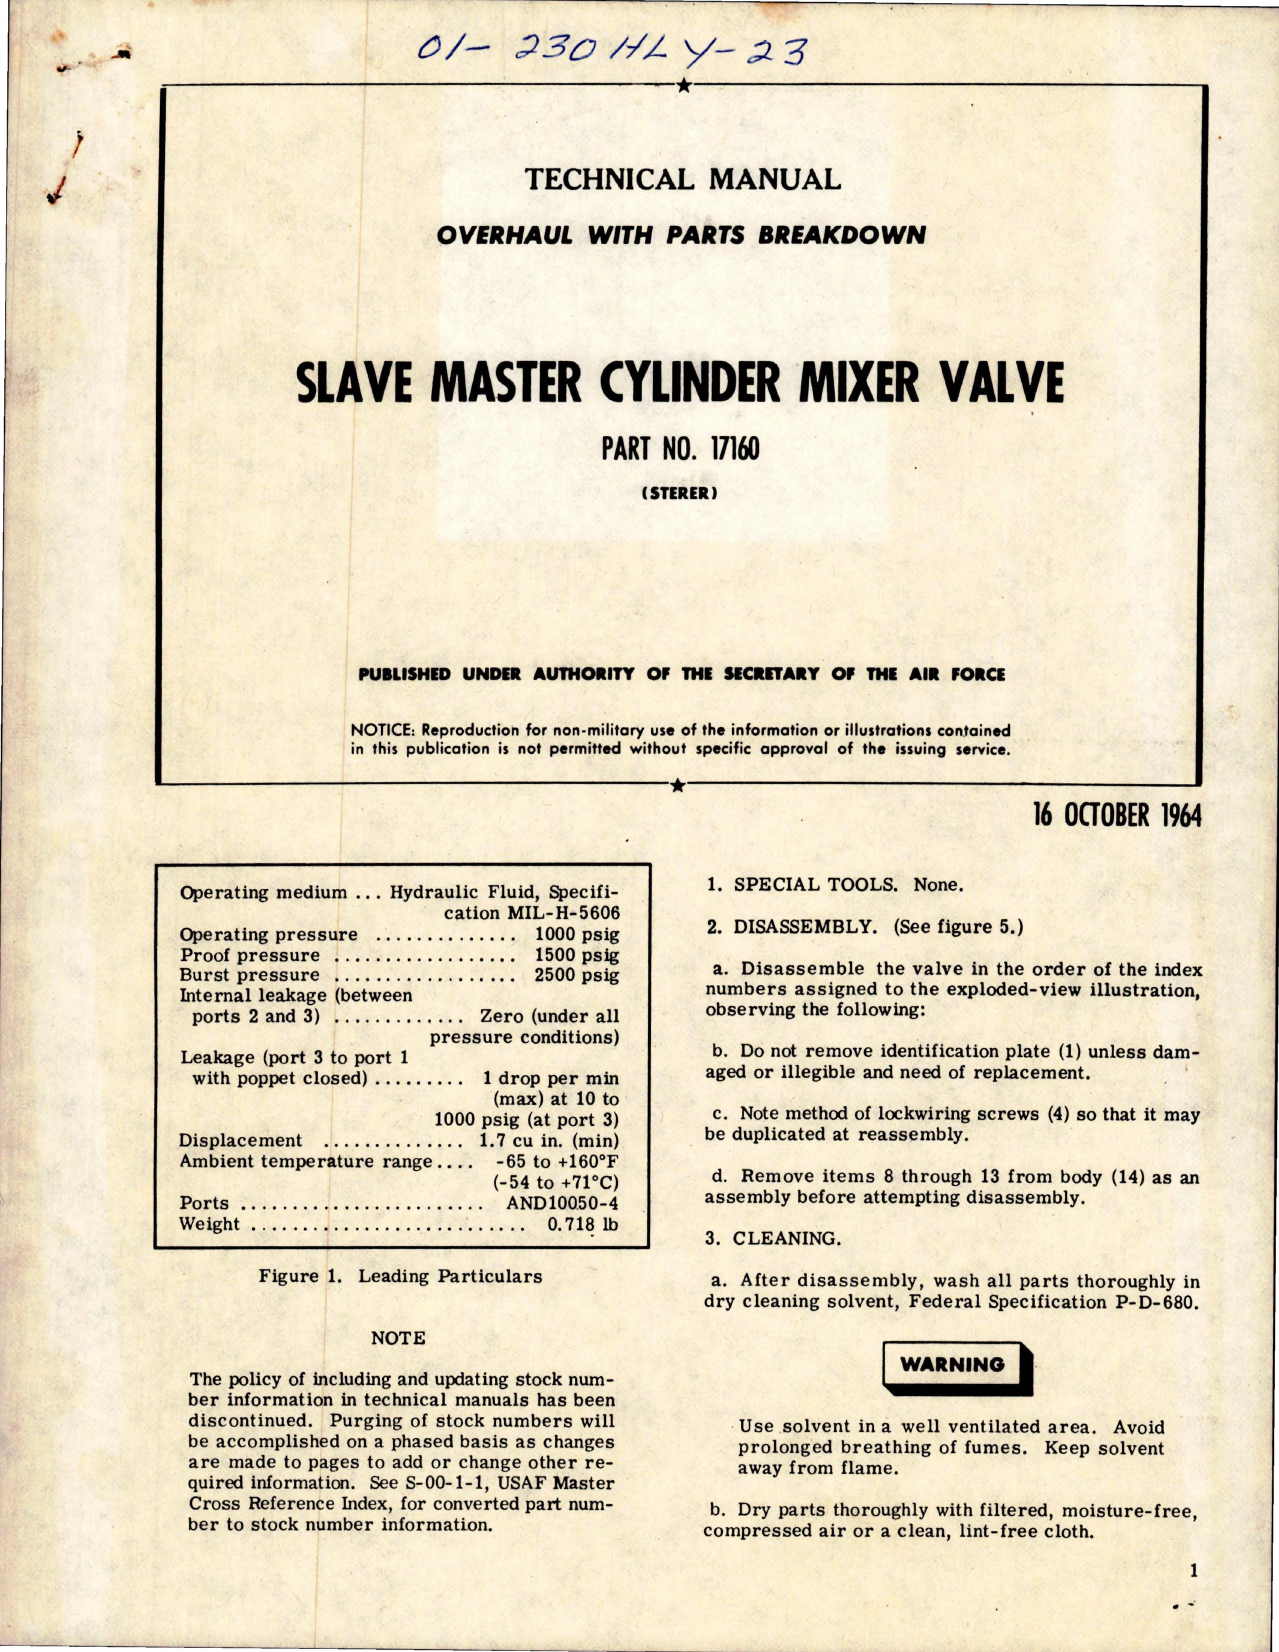 Sample page 1 from AirCorps Library document: Overhaul with Parts Breakdown for Slave Master Cylinder Mixer Valve - Part 17160 